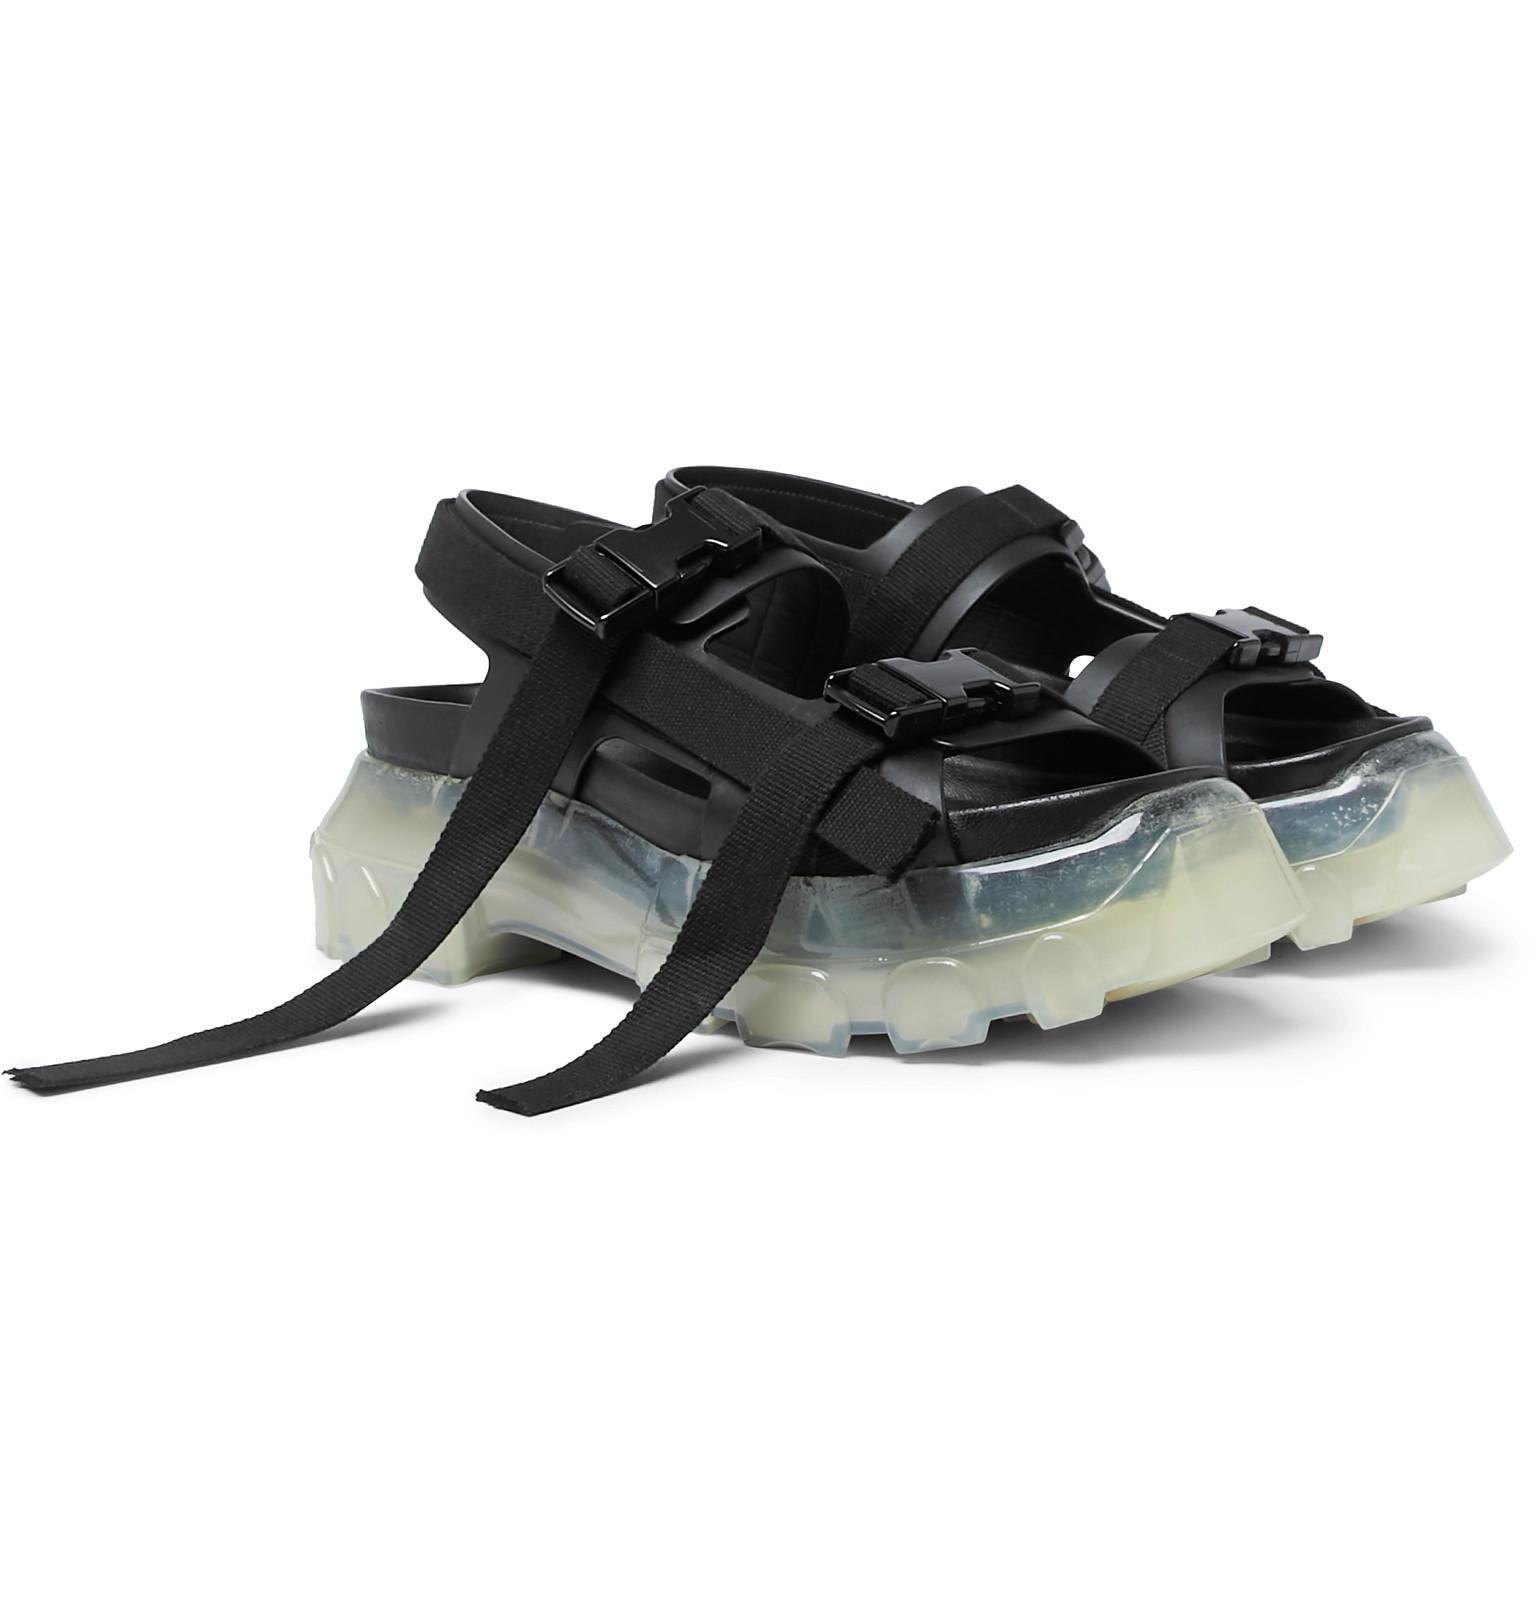 Rick Owens Leather Tractor Sandal in Black for Men - Lyst